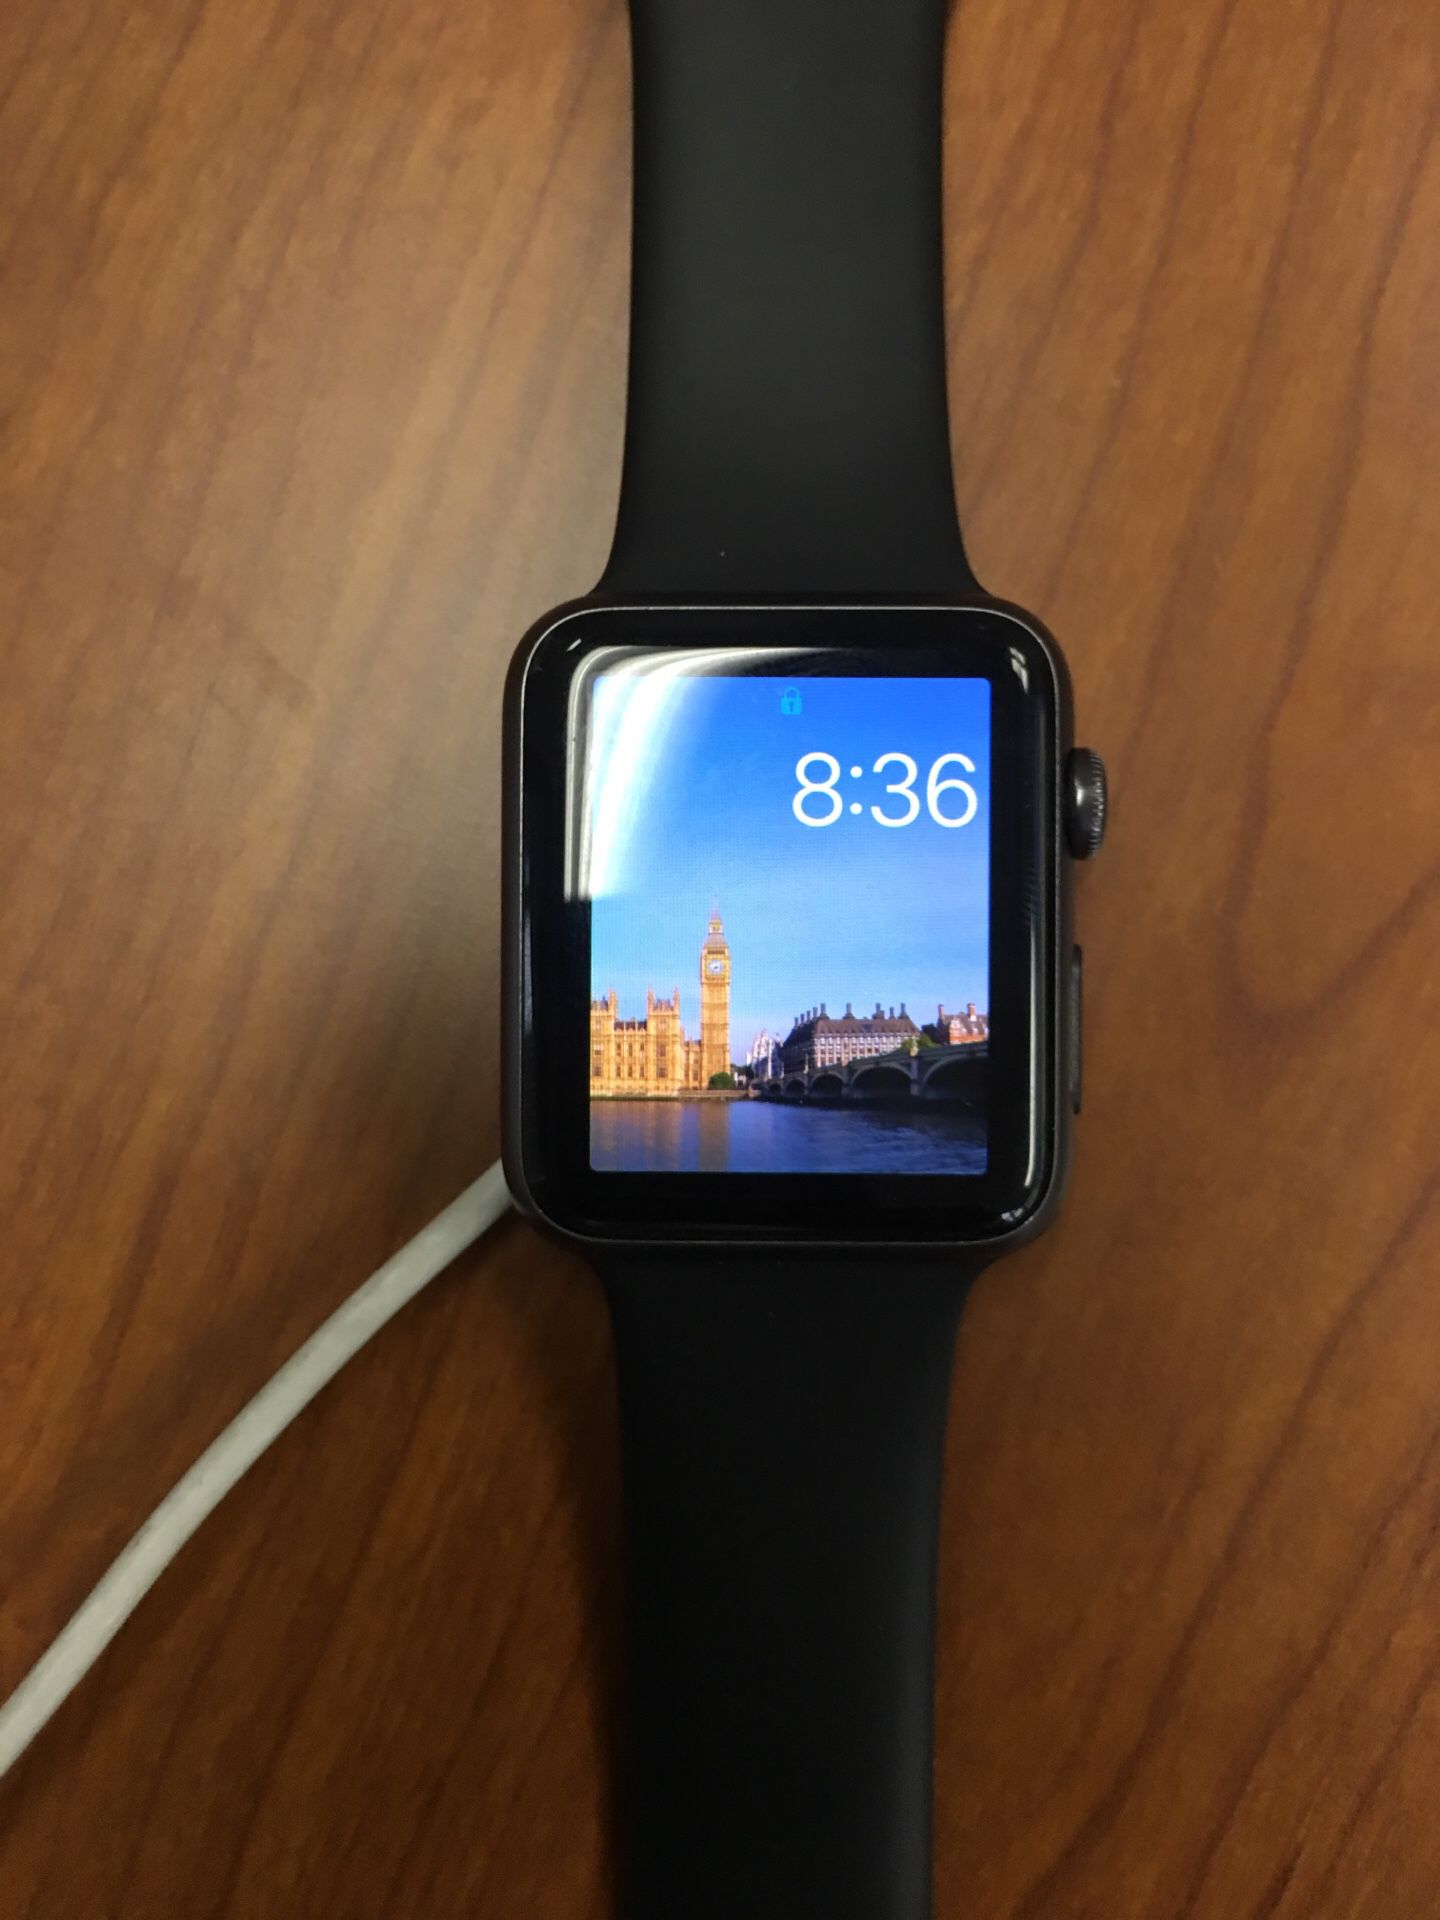 Apple Watch Series 1 selling for $100